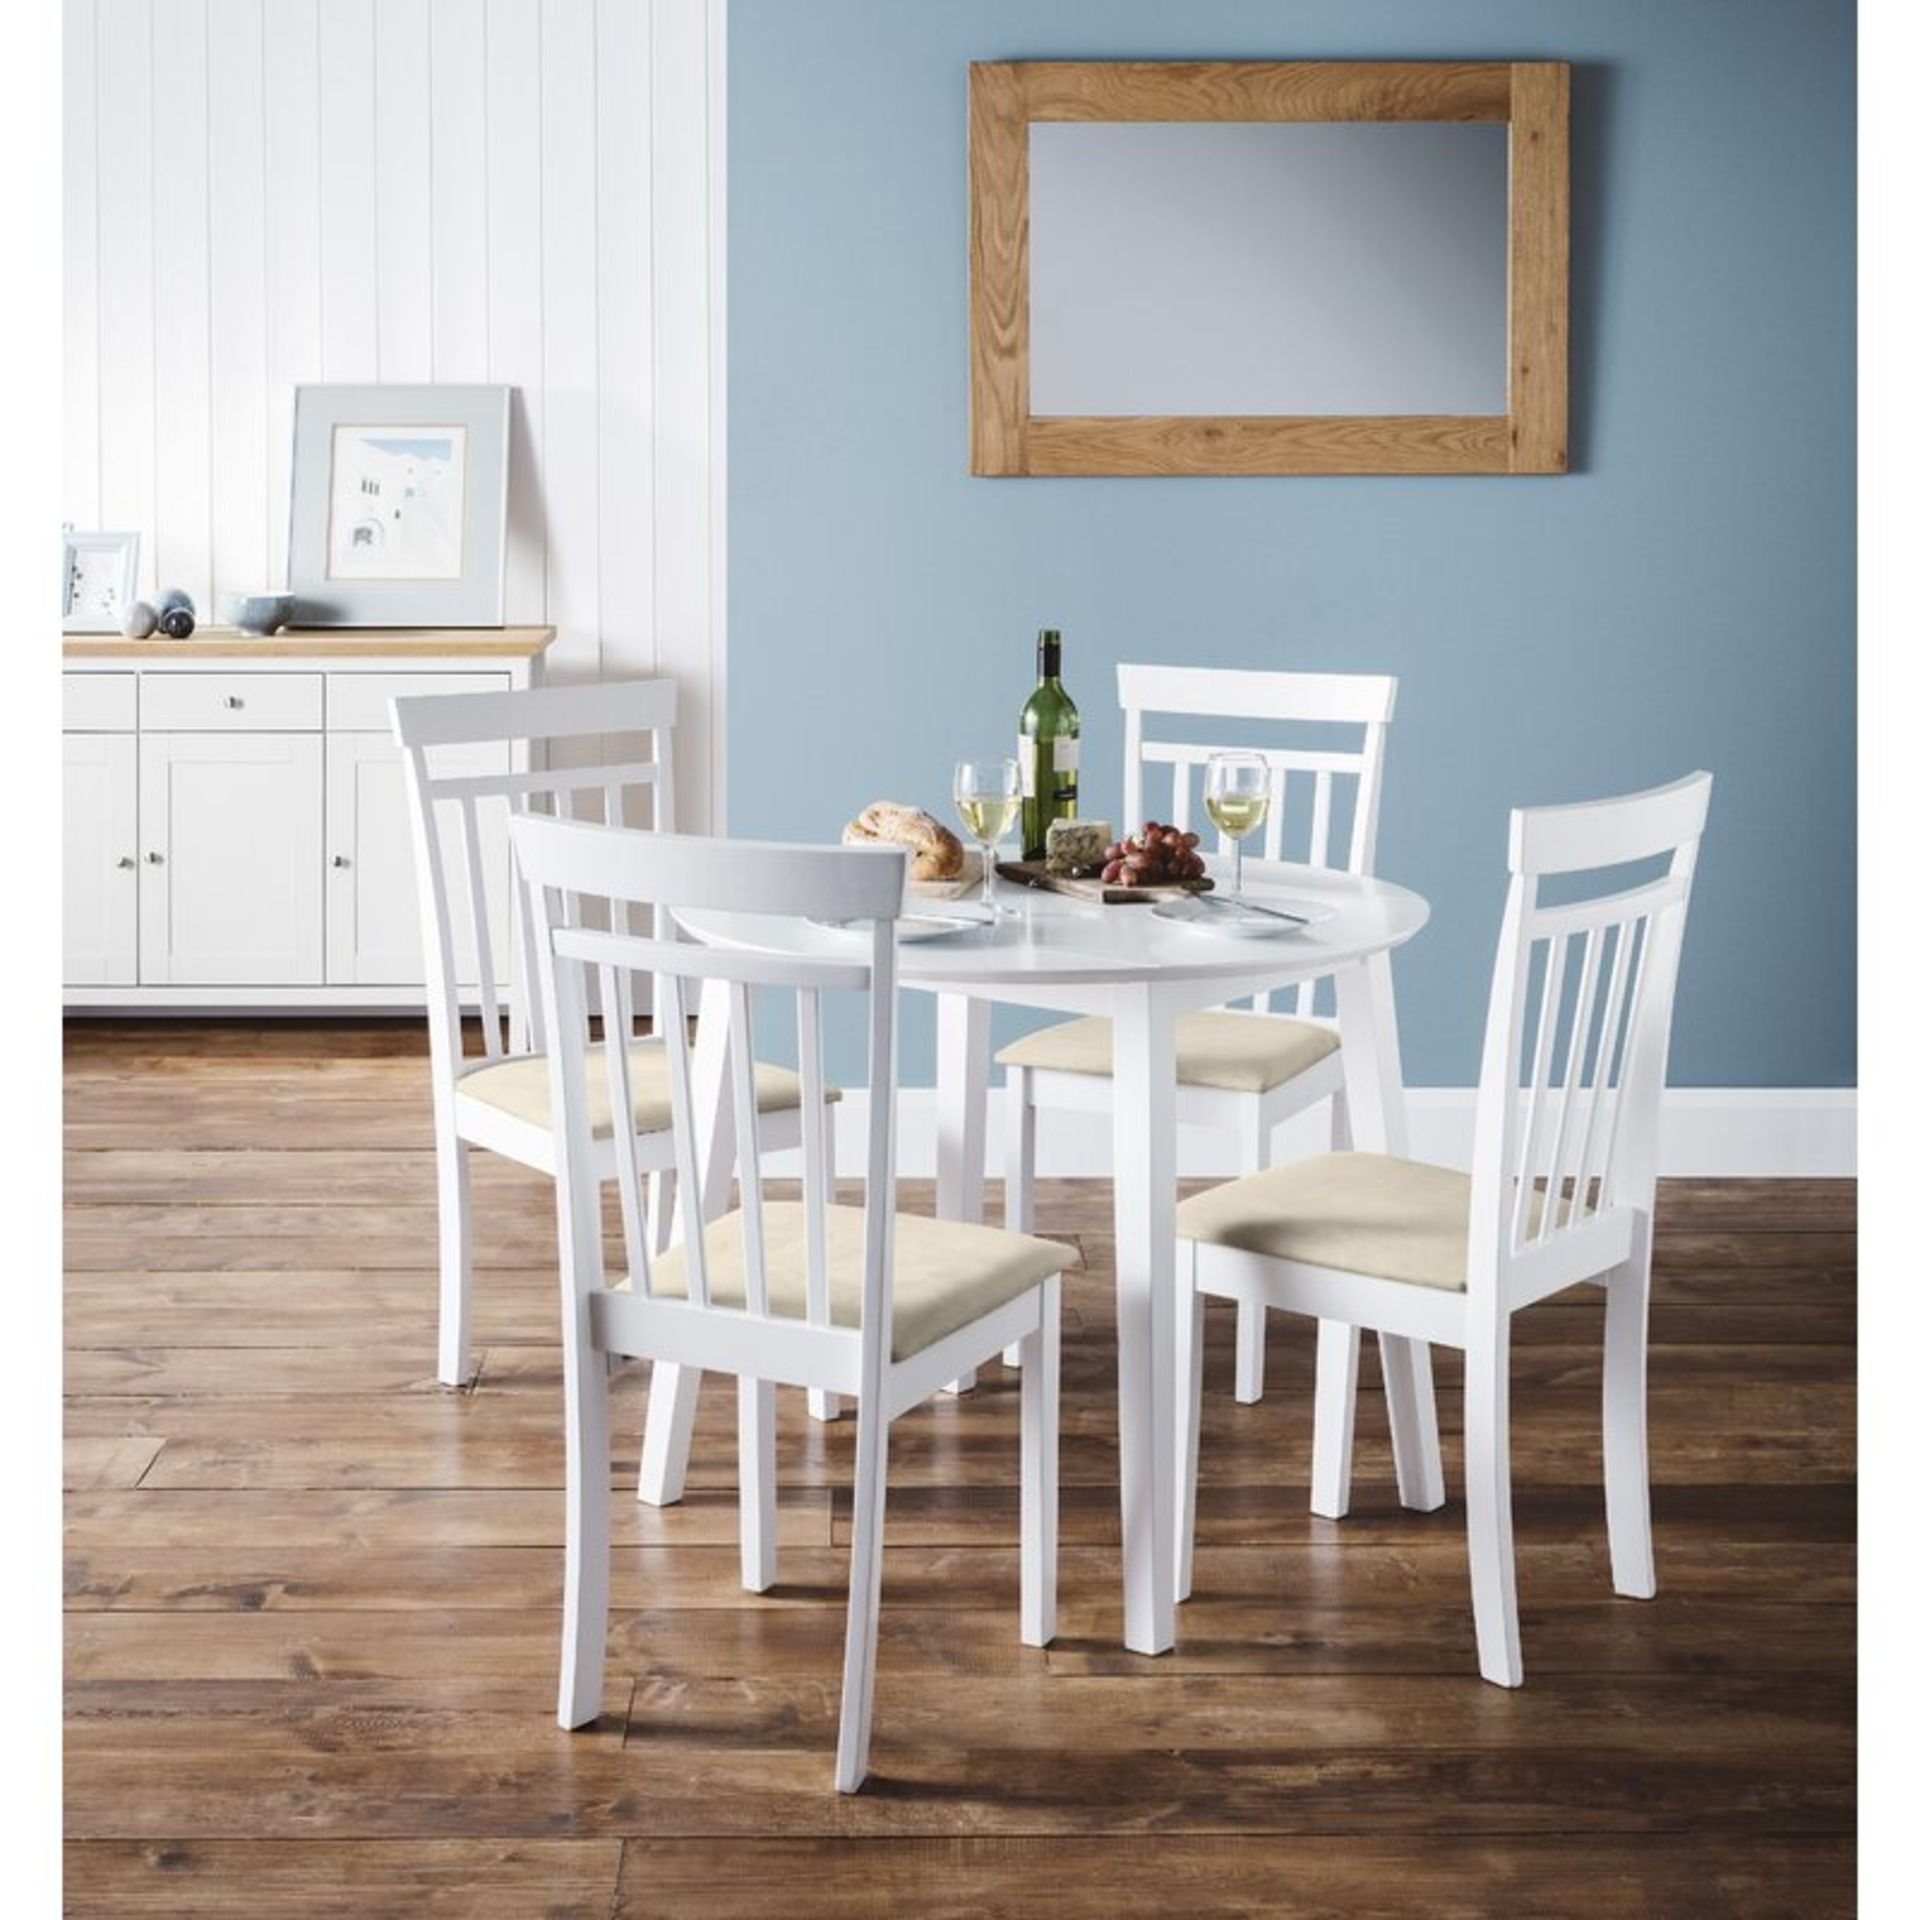 Inglewood Extendable Dining Table - RRP £119.99 - Image 2 of 3